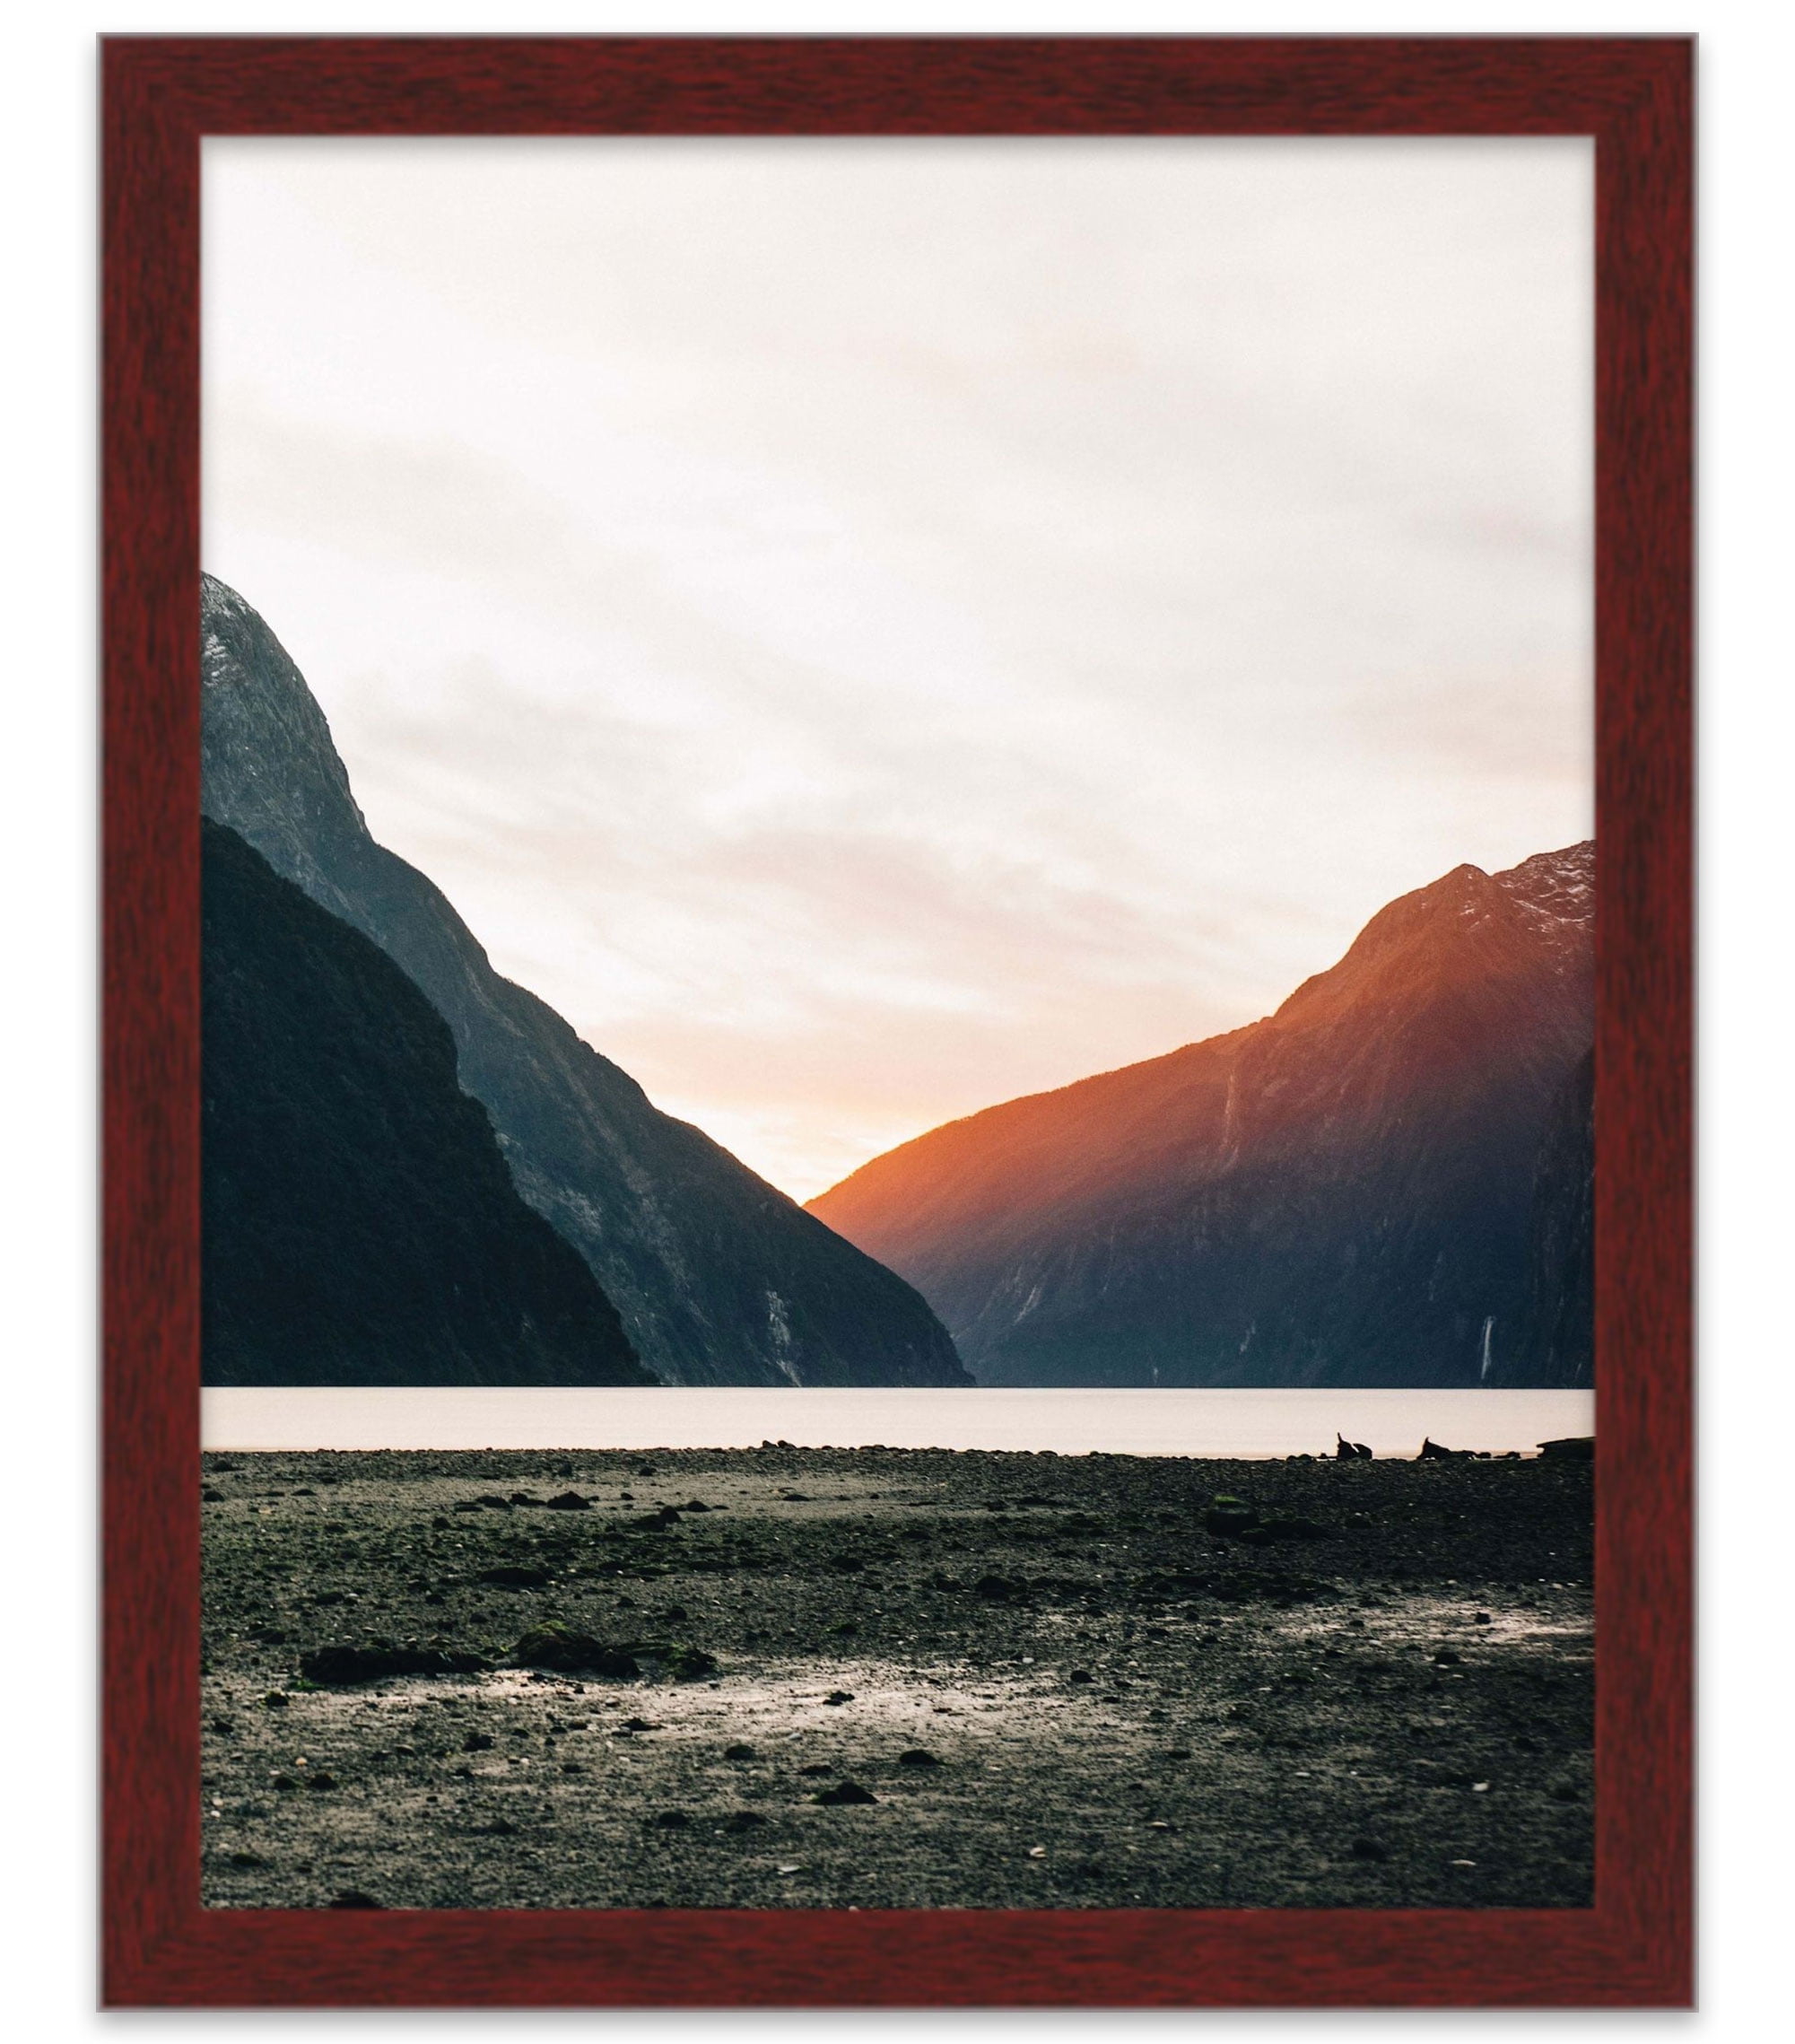 Brown Wood 40x30 Picture Frame 40x30 Frame Poster Photo